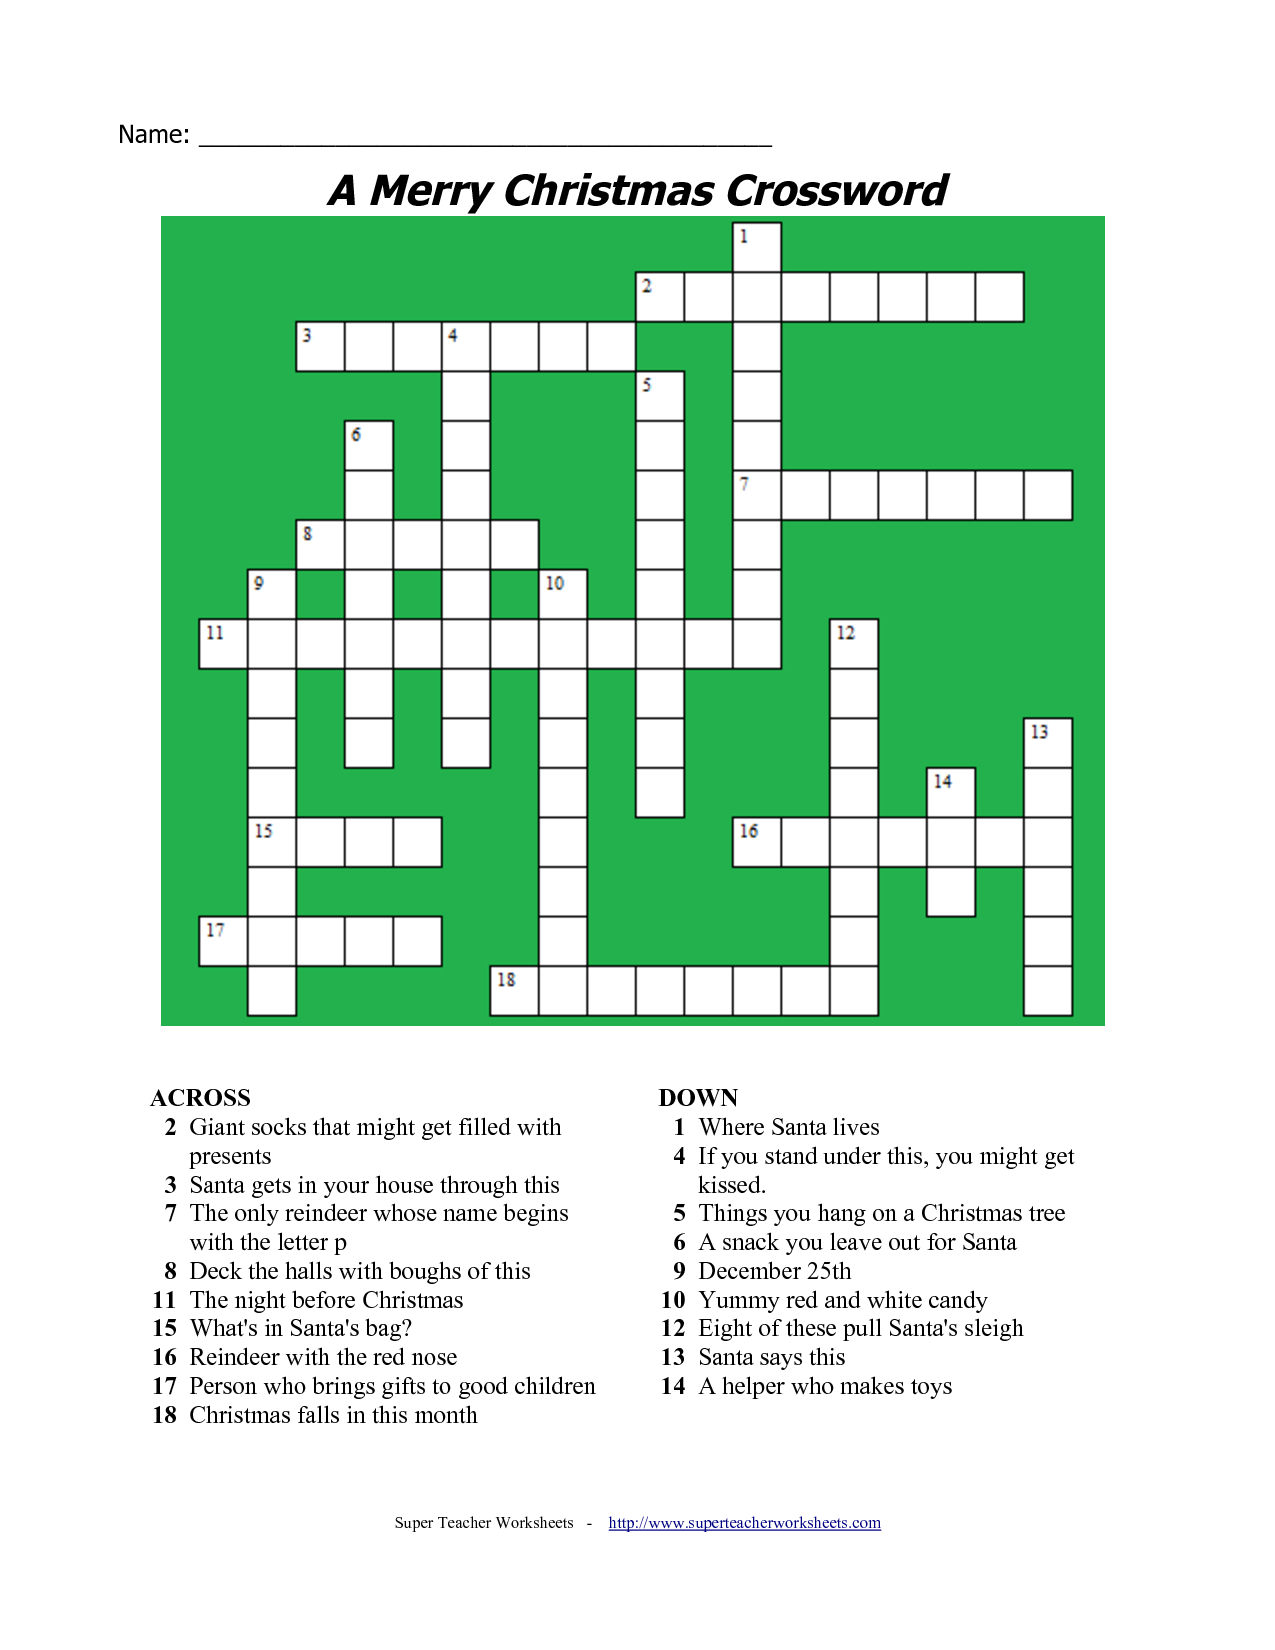 Printable Holiday Crossword Puzzles Printable Crossword Puzzles